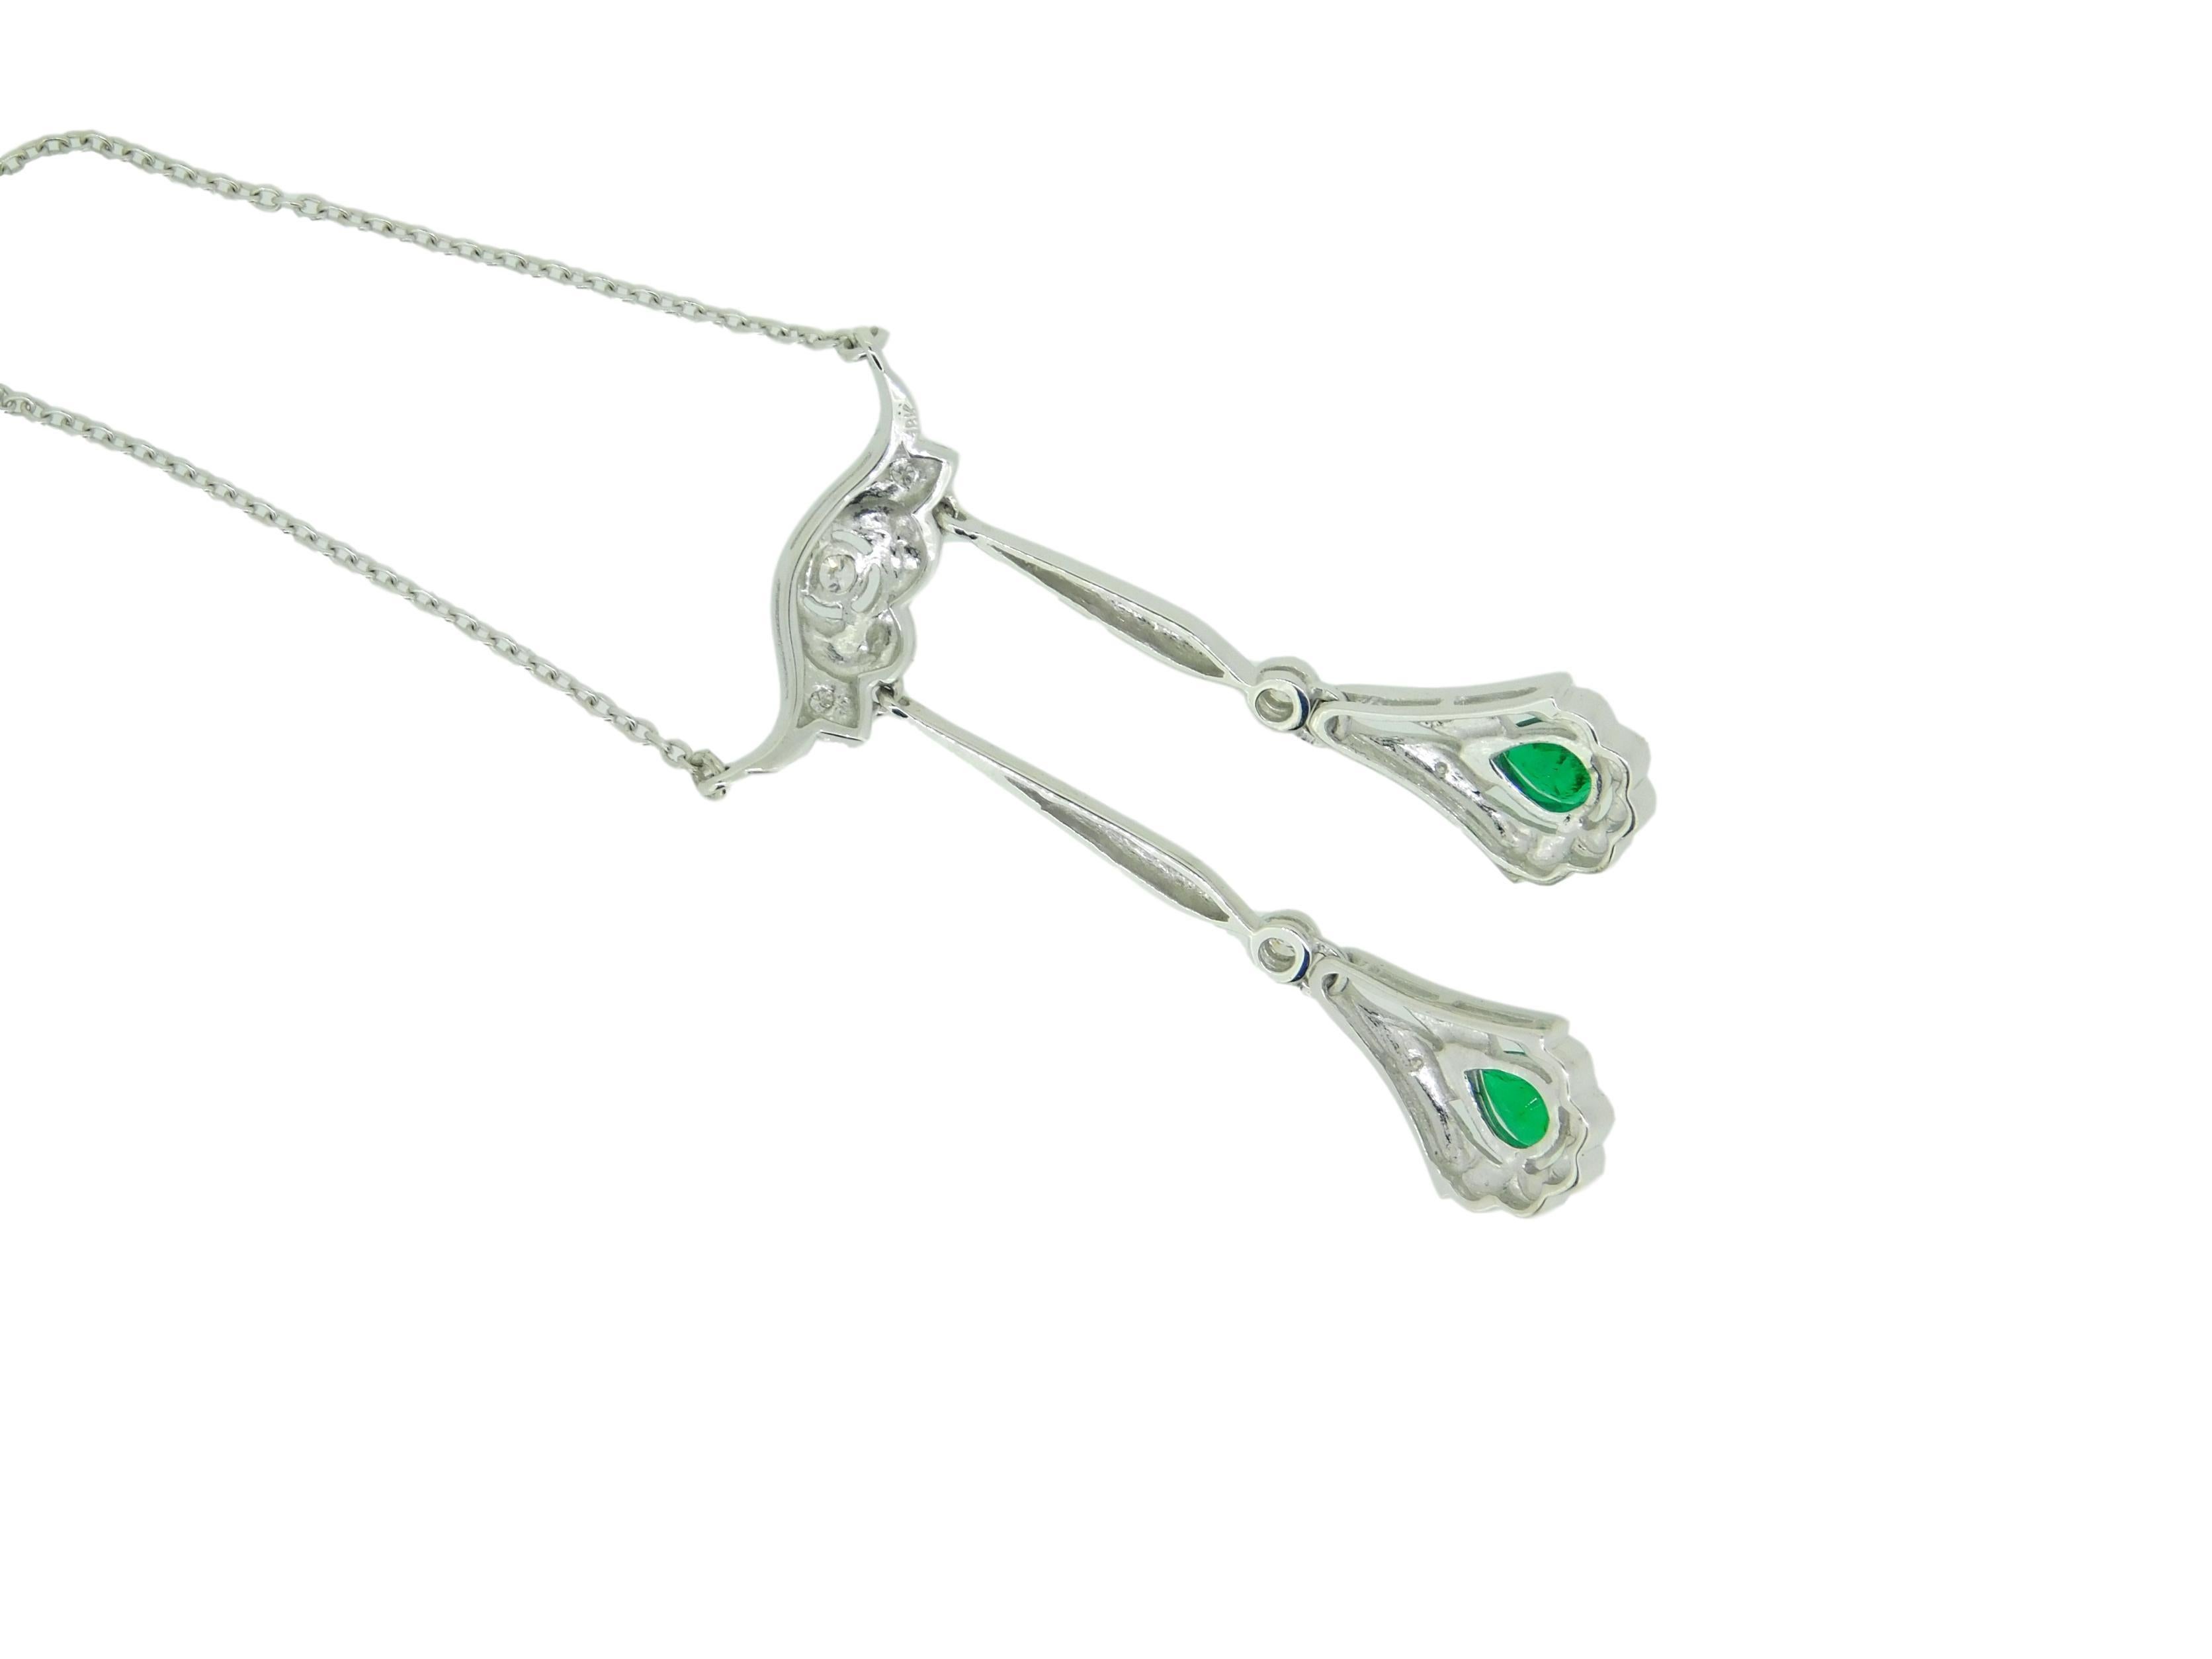 18k White Gold Fancy Drop Genuine Natural Emerald and Diamond Necklace (#J4719)

18k white gold necklace featuring two drops with pear shape emeralds weighing .54cts total. The emeralds are fine quality and have medium dark green color. The emeralds